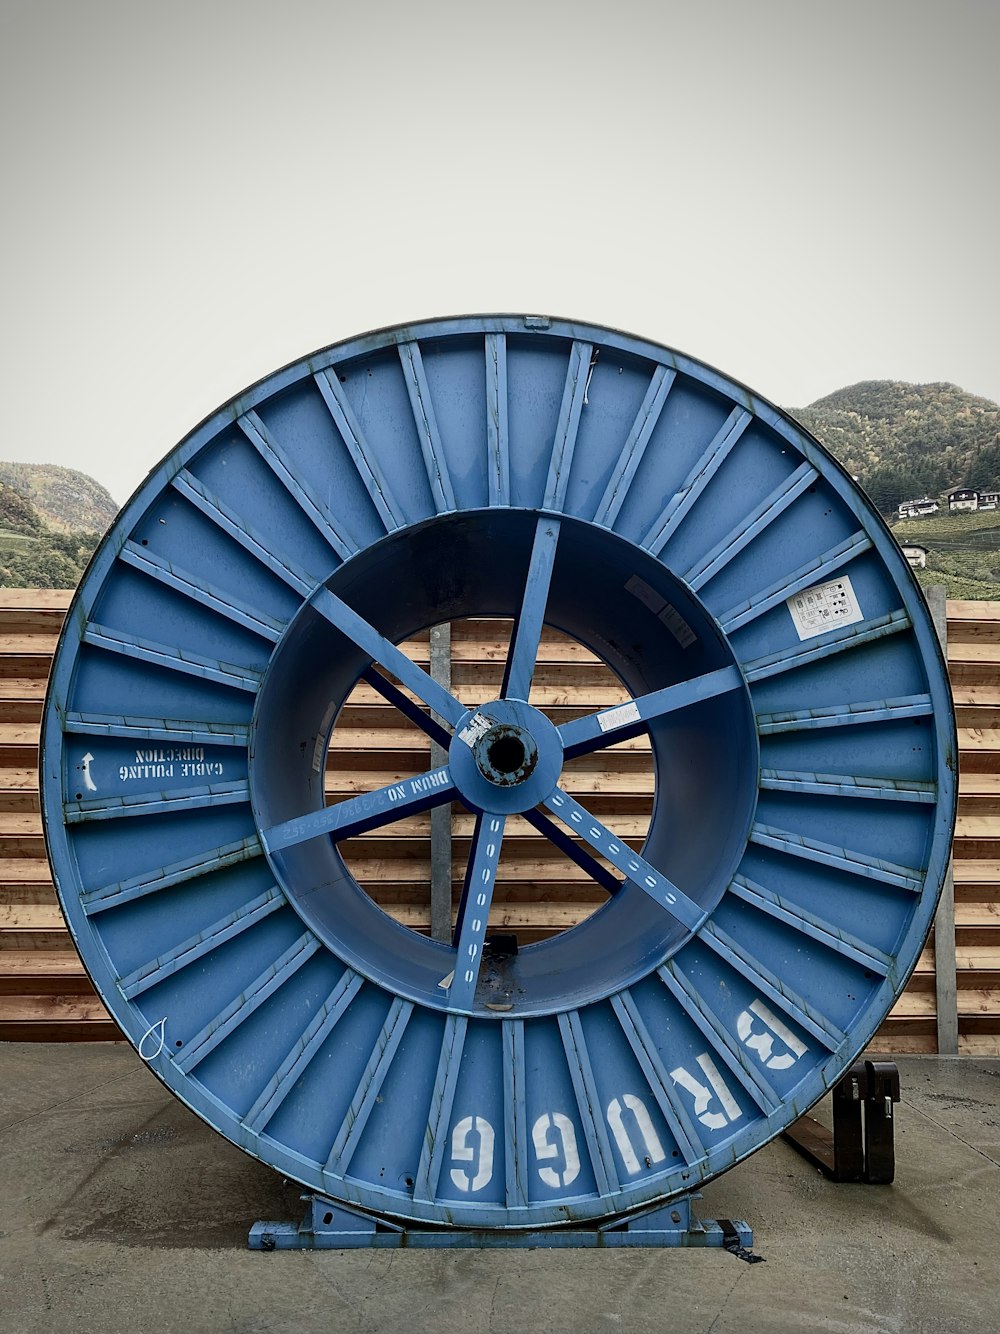 blue and black round wheel on brown wooden dock during daytime